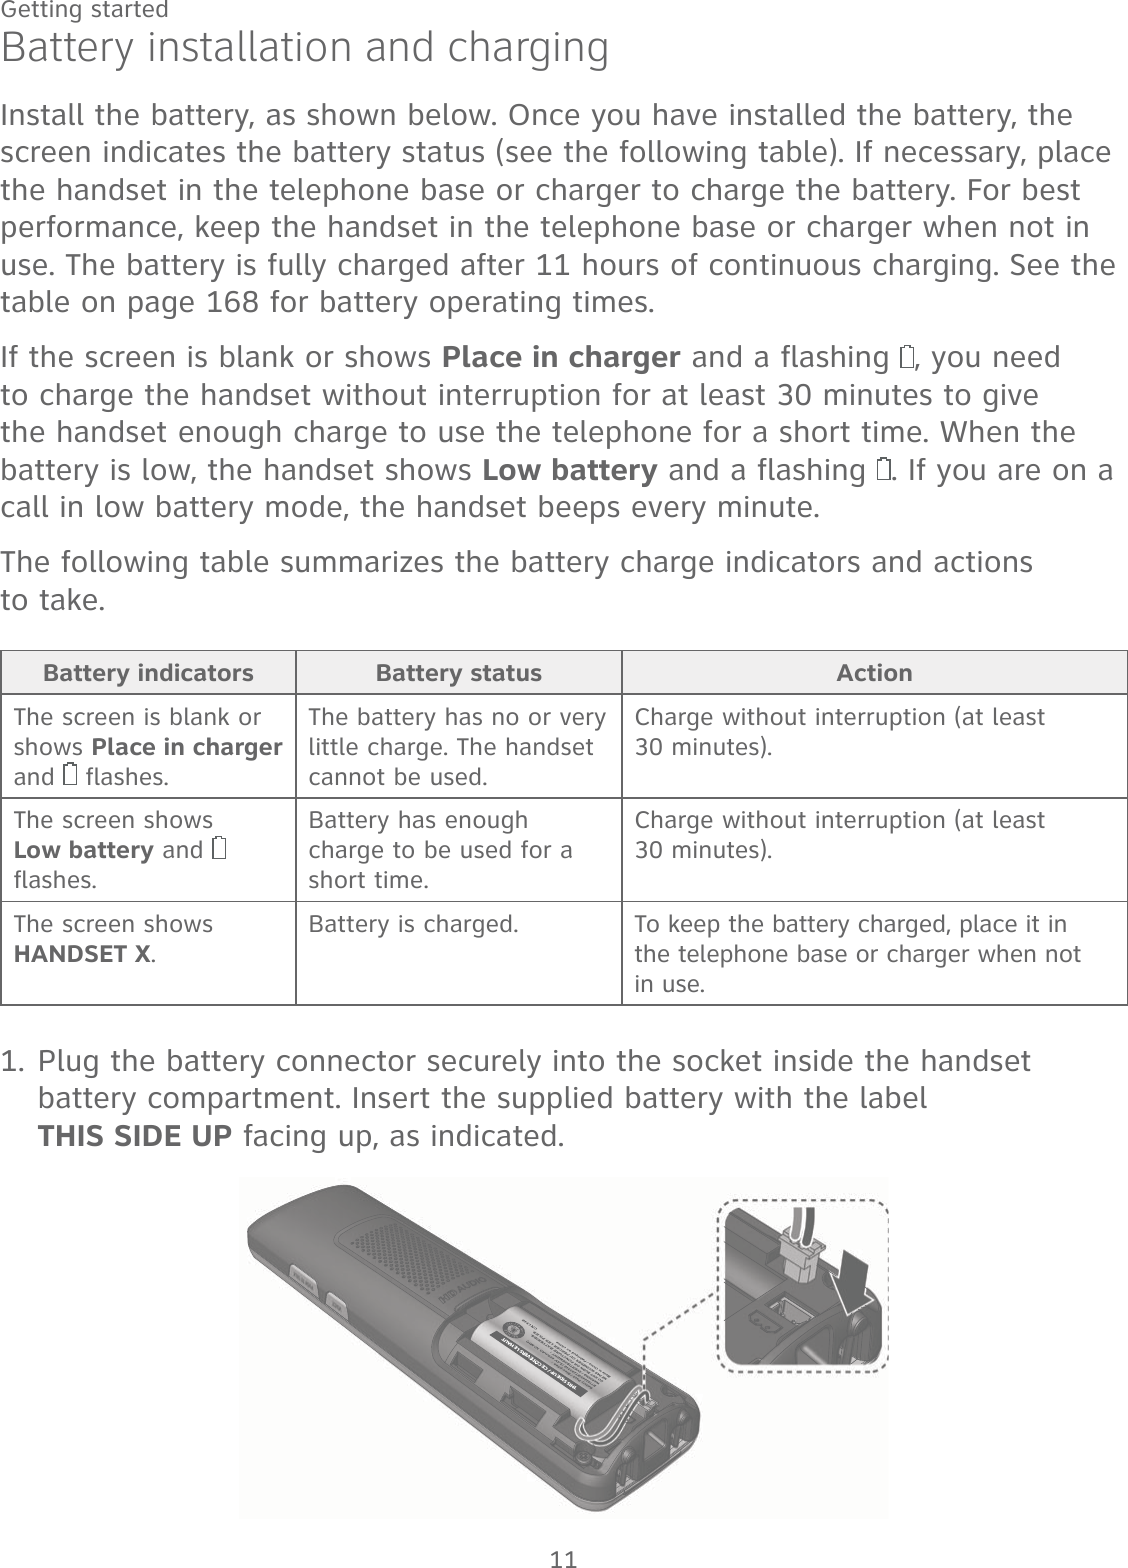 11Getting startedBattery installation and chargingInstall the battery, as shown below. Once you have installed the battery, the screen indicates the battery status (see the following table). If necessary, place the handset in the telephone base or charger to charge the battery. For best performance, keep the handset in the telephone base or charger when not in use. The battery is fully charged after 11 hours of continuous charging. See the table on page 168 for battery operating times.If the screen is blank or shows Place in charger and a flashing  , you need to charge the handset without interruption for at least 30 minutes to give the handset enough charge to use the telephone for a short time. When the battery is low, the handset shows Low battery and a flashing  . If you are on a call in low battery mode, the handset beeps every minute.The following table summarizes the battery charge indicators and actions  to take.Battery indicators Battery status ActionThe screen is blank or shows Place in charger and   flashes.The battery has no or very little charge. The handset cannot be used.Charge without interruption (at least  30 minutes).The screen shows  Low battery and   flashes.Battery has enough charge to be used for a short time.Charge without interruption (at least  30 minutes).The screen shows  HANDSET X.Battery is charged. To keep the battery charged, place it in the telephone base or charger when not in use.Plug the battery connector securely into the socket inside the handset battery compartment. Insert the supplied battery with the label  THIS SIDE UP facing up, as indicated.1.THIS SIDE UP / CE CÔTÉ VERS LE HAUT